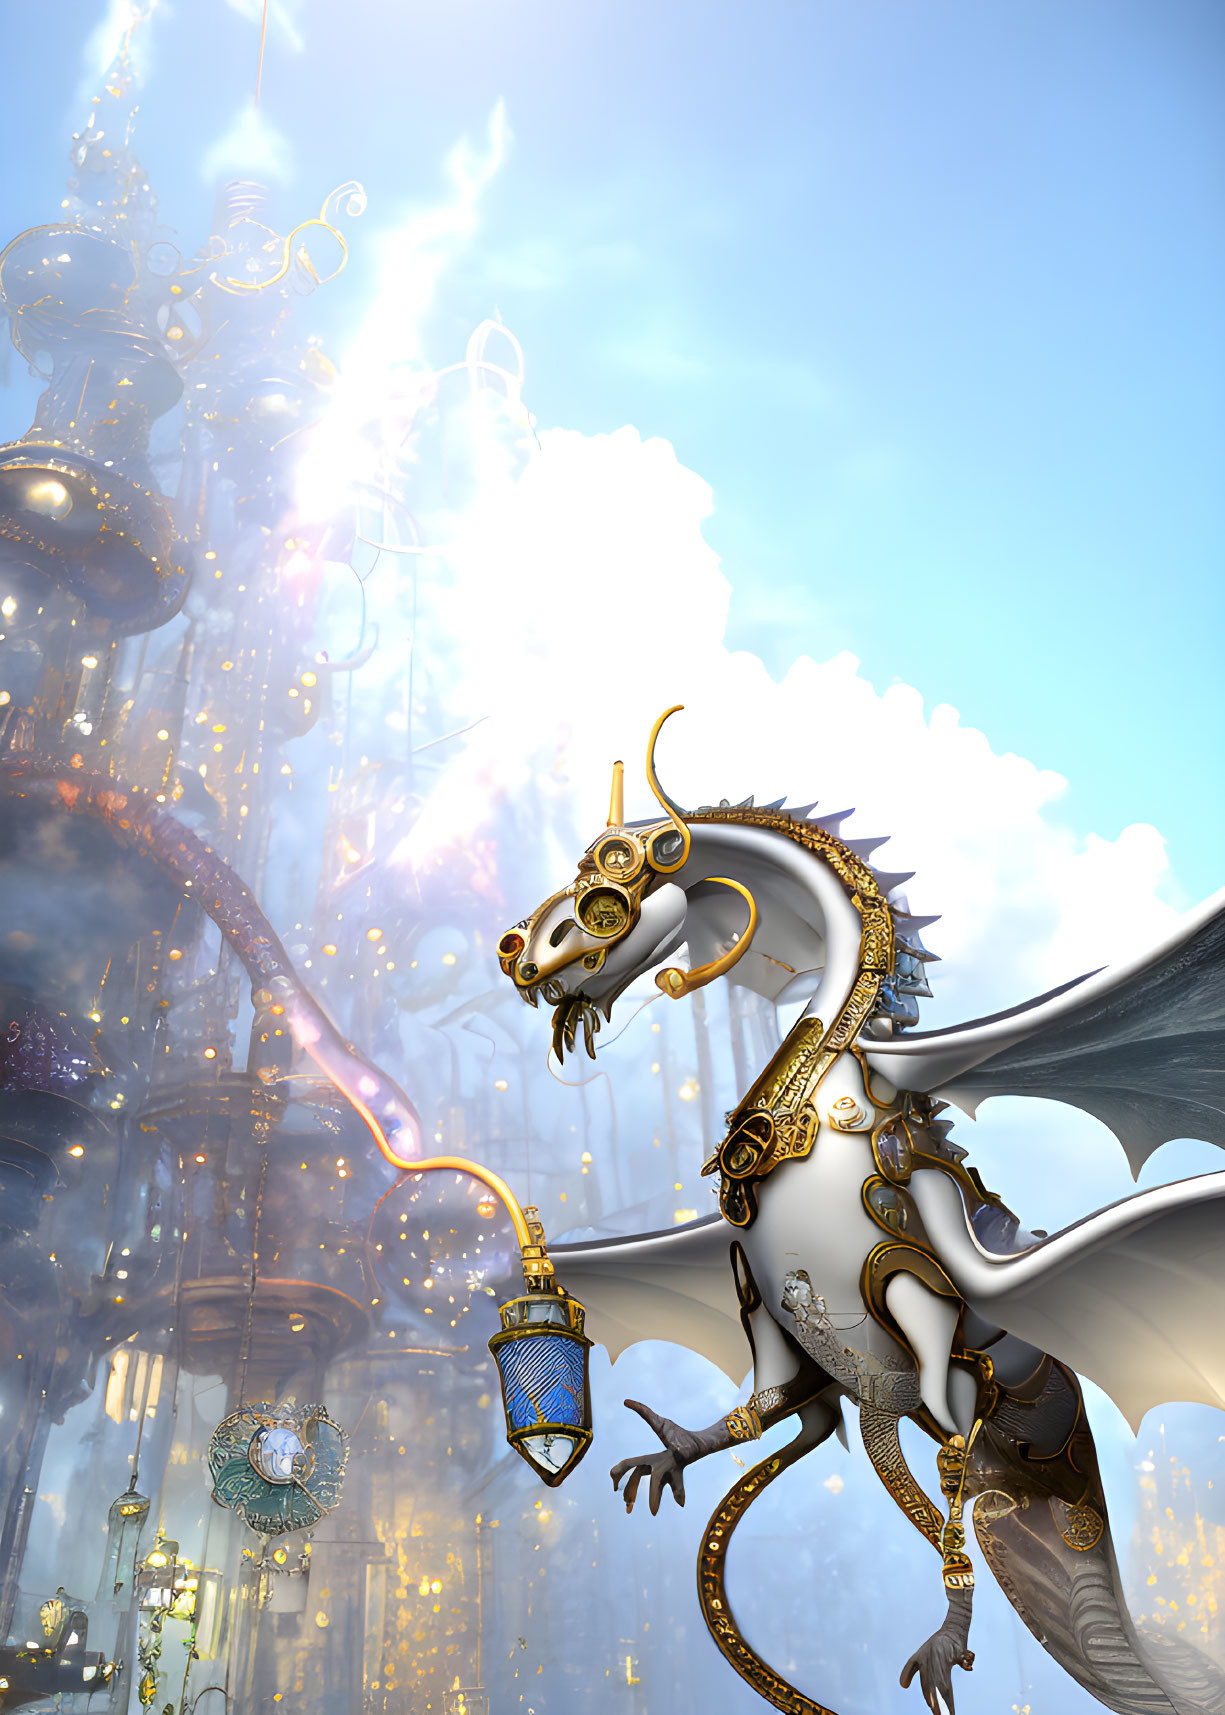 Majestic white and gold dragon in fantastical city with ornate towers